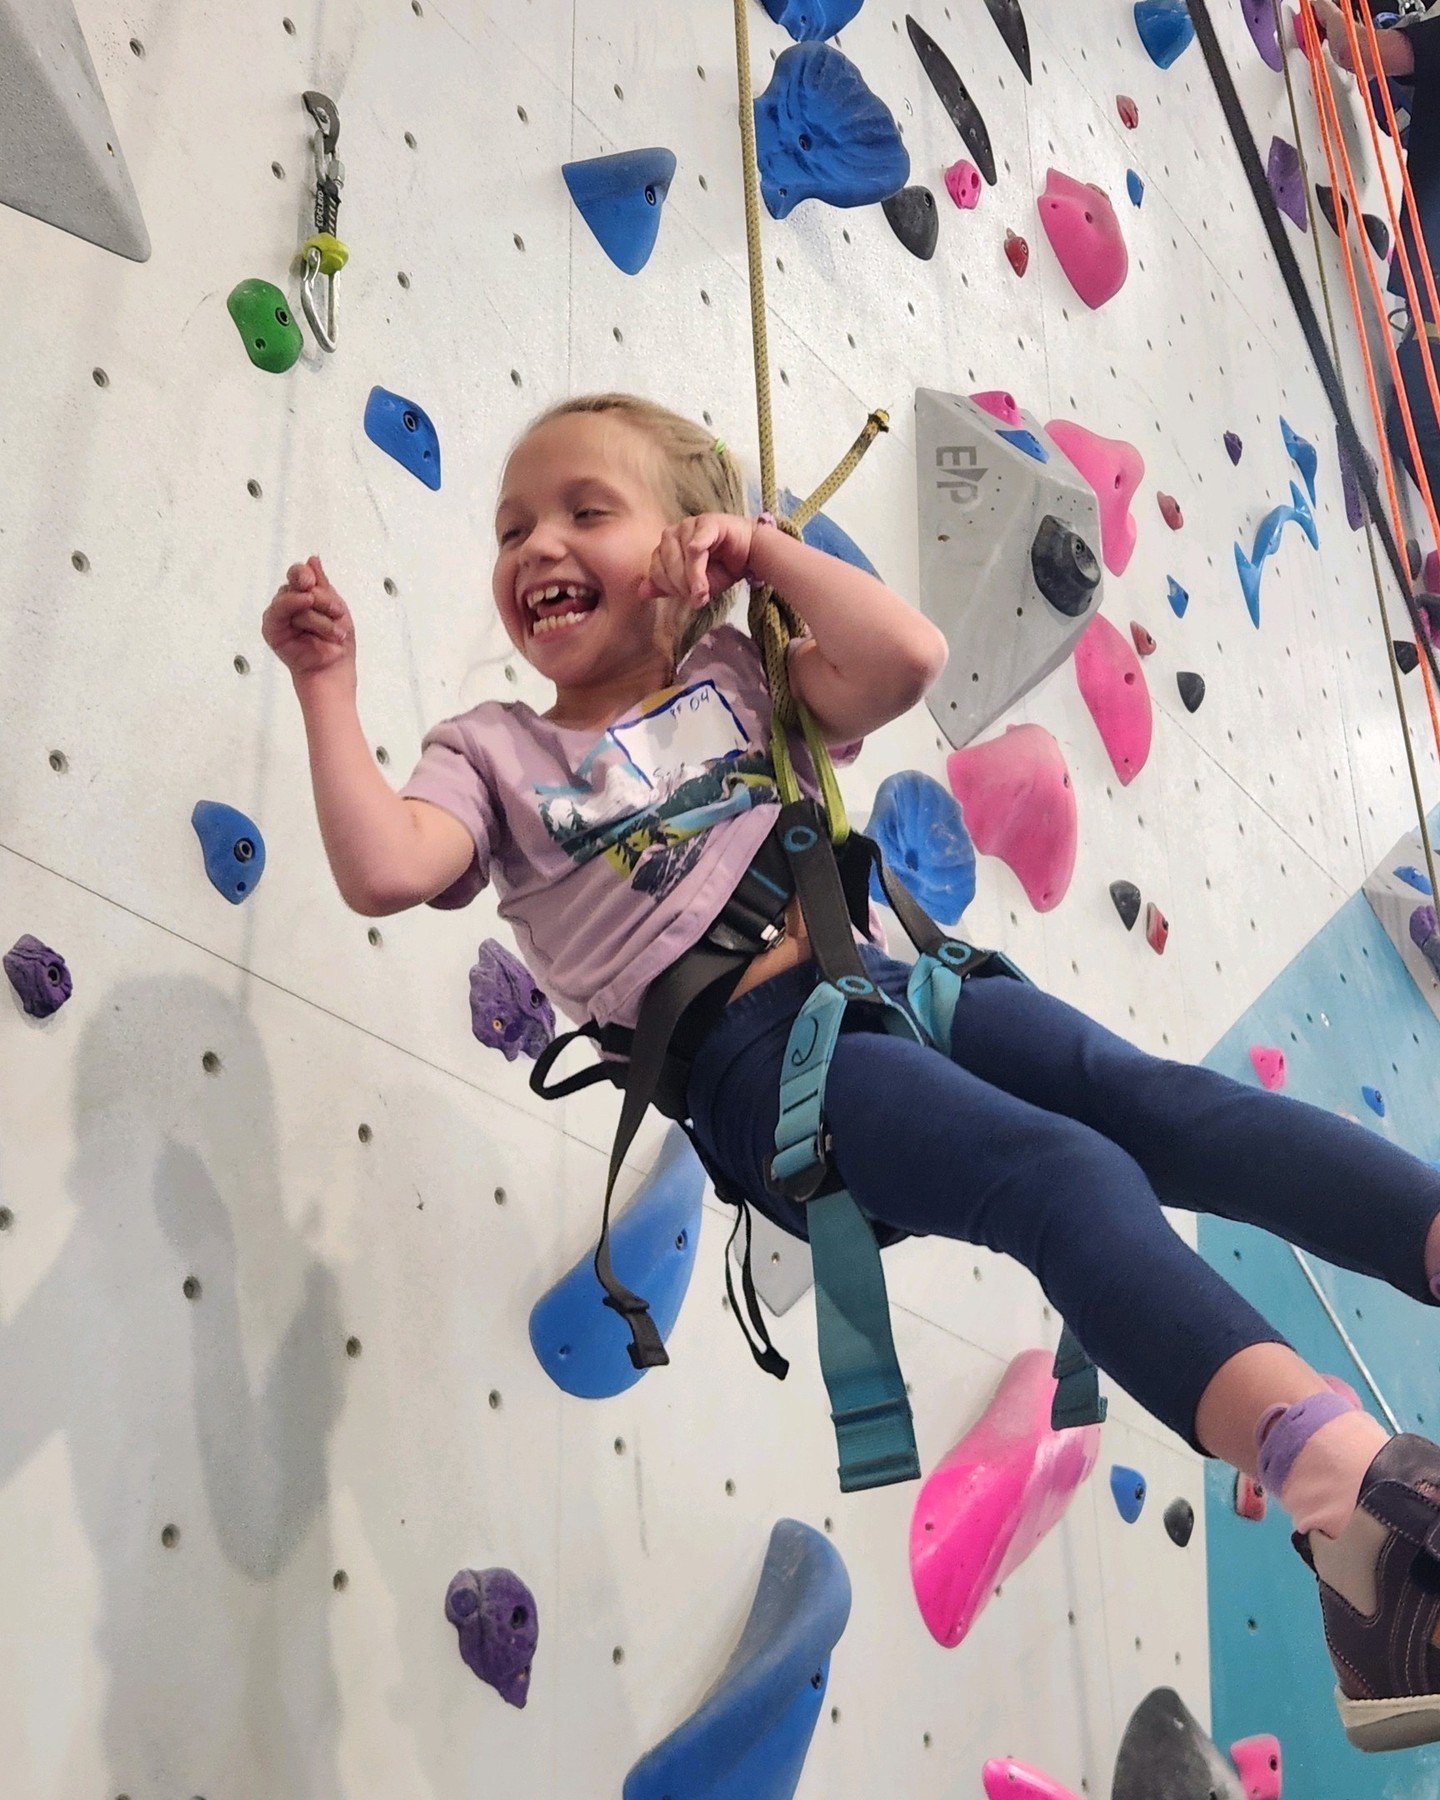 Last Sunday we partnered with Courageous Kids to share climbing with 8 kids with disabilities. We had staff from Coeur, Kootenai County Fire, and Post Falls Police helping with belaying and instructing. 
Coeur Climbing is starting a partnership with 